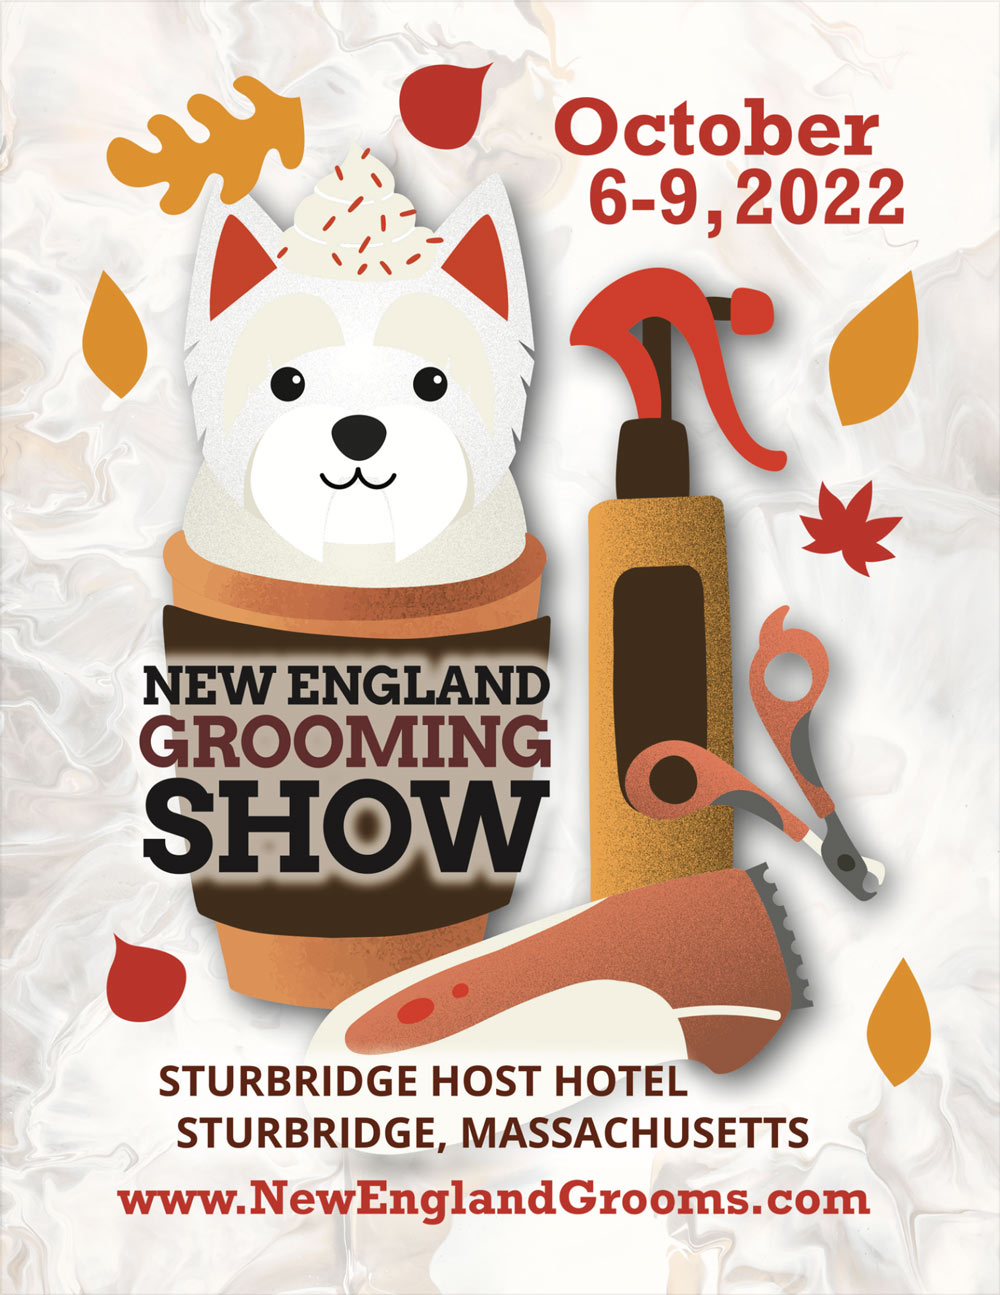 New England Grooming Show Advertisement